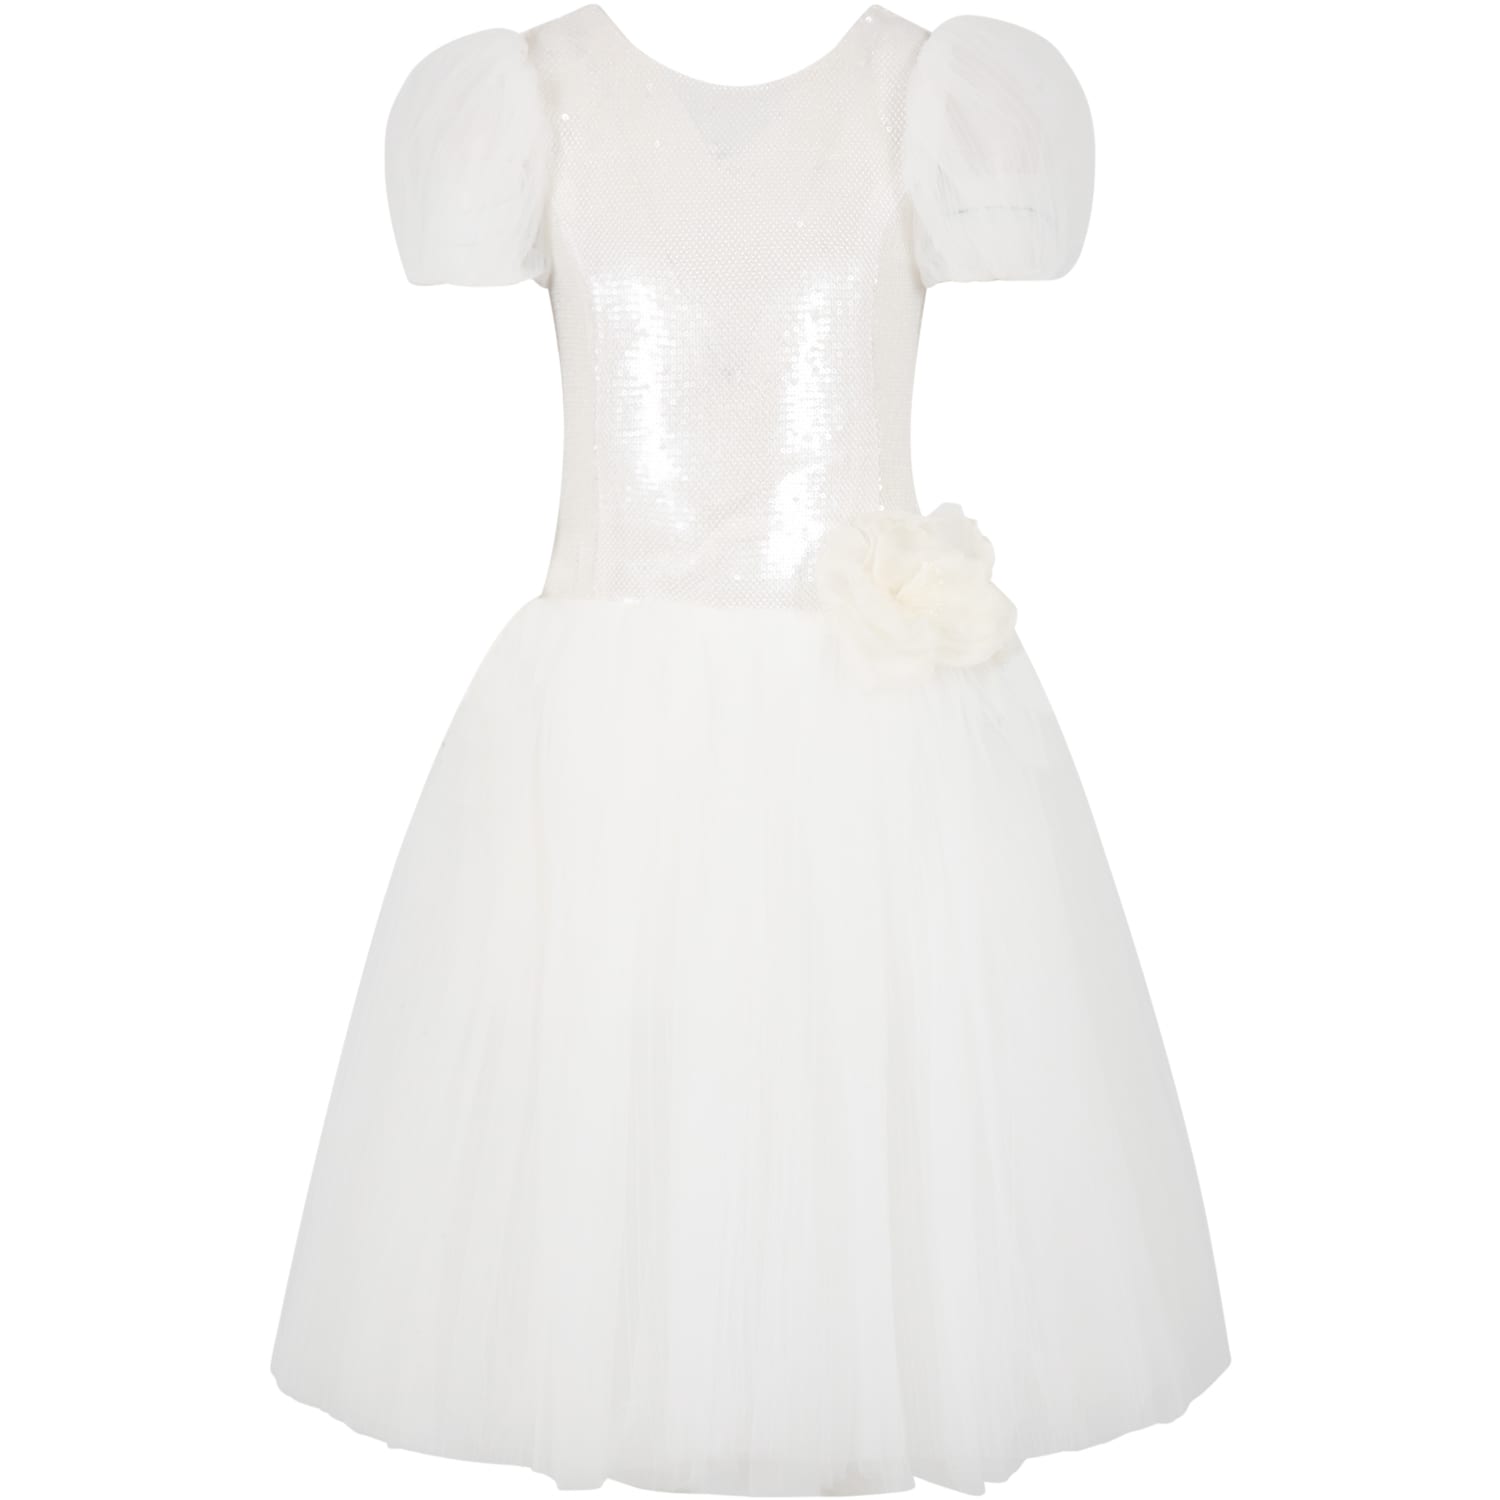 Monnalisa Kids' White Dress For Girl With Flowers